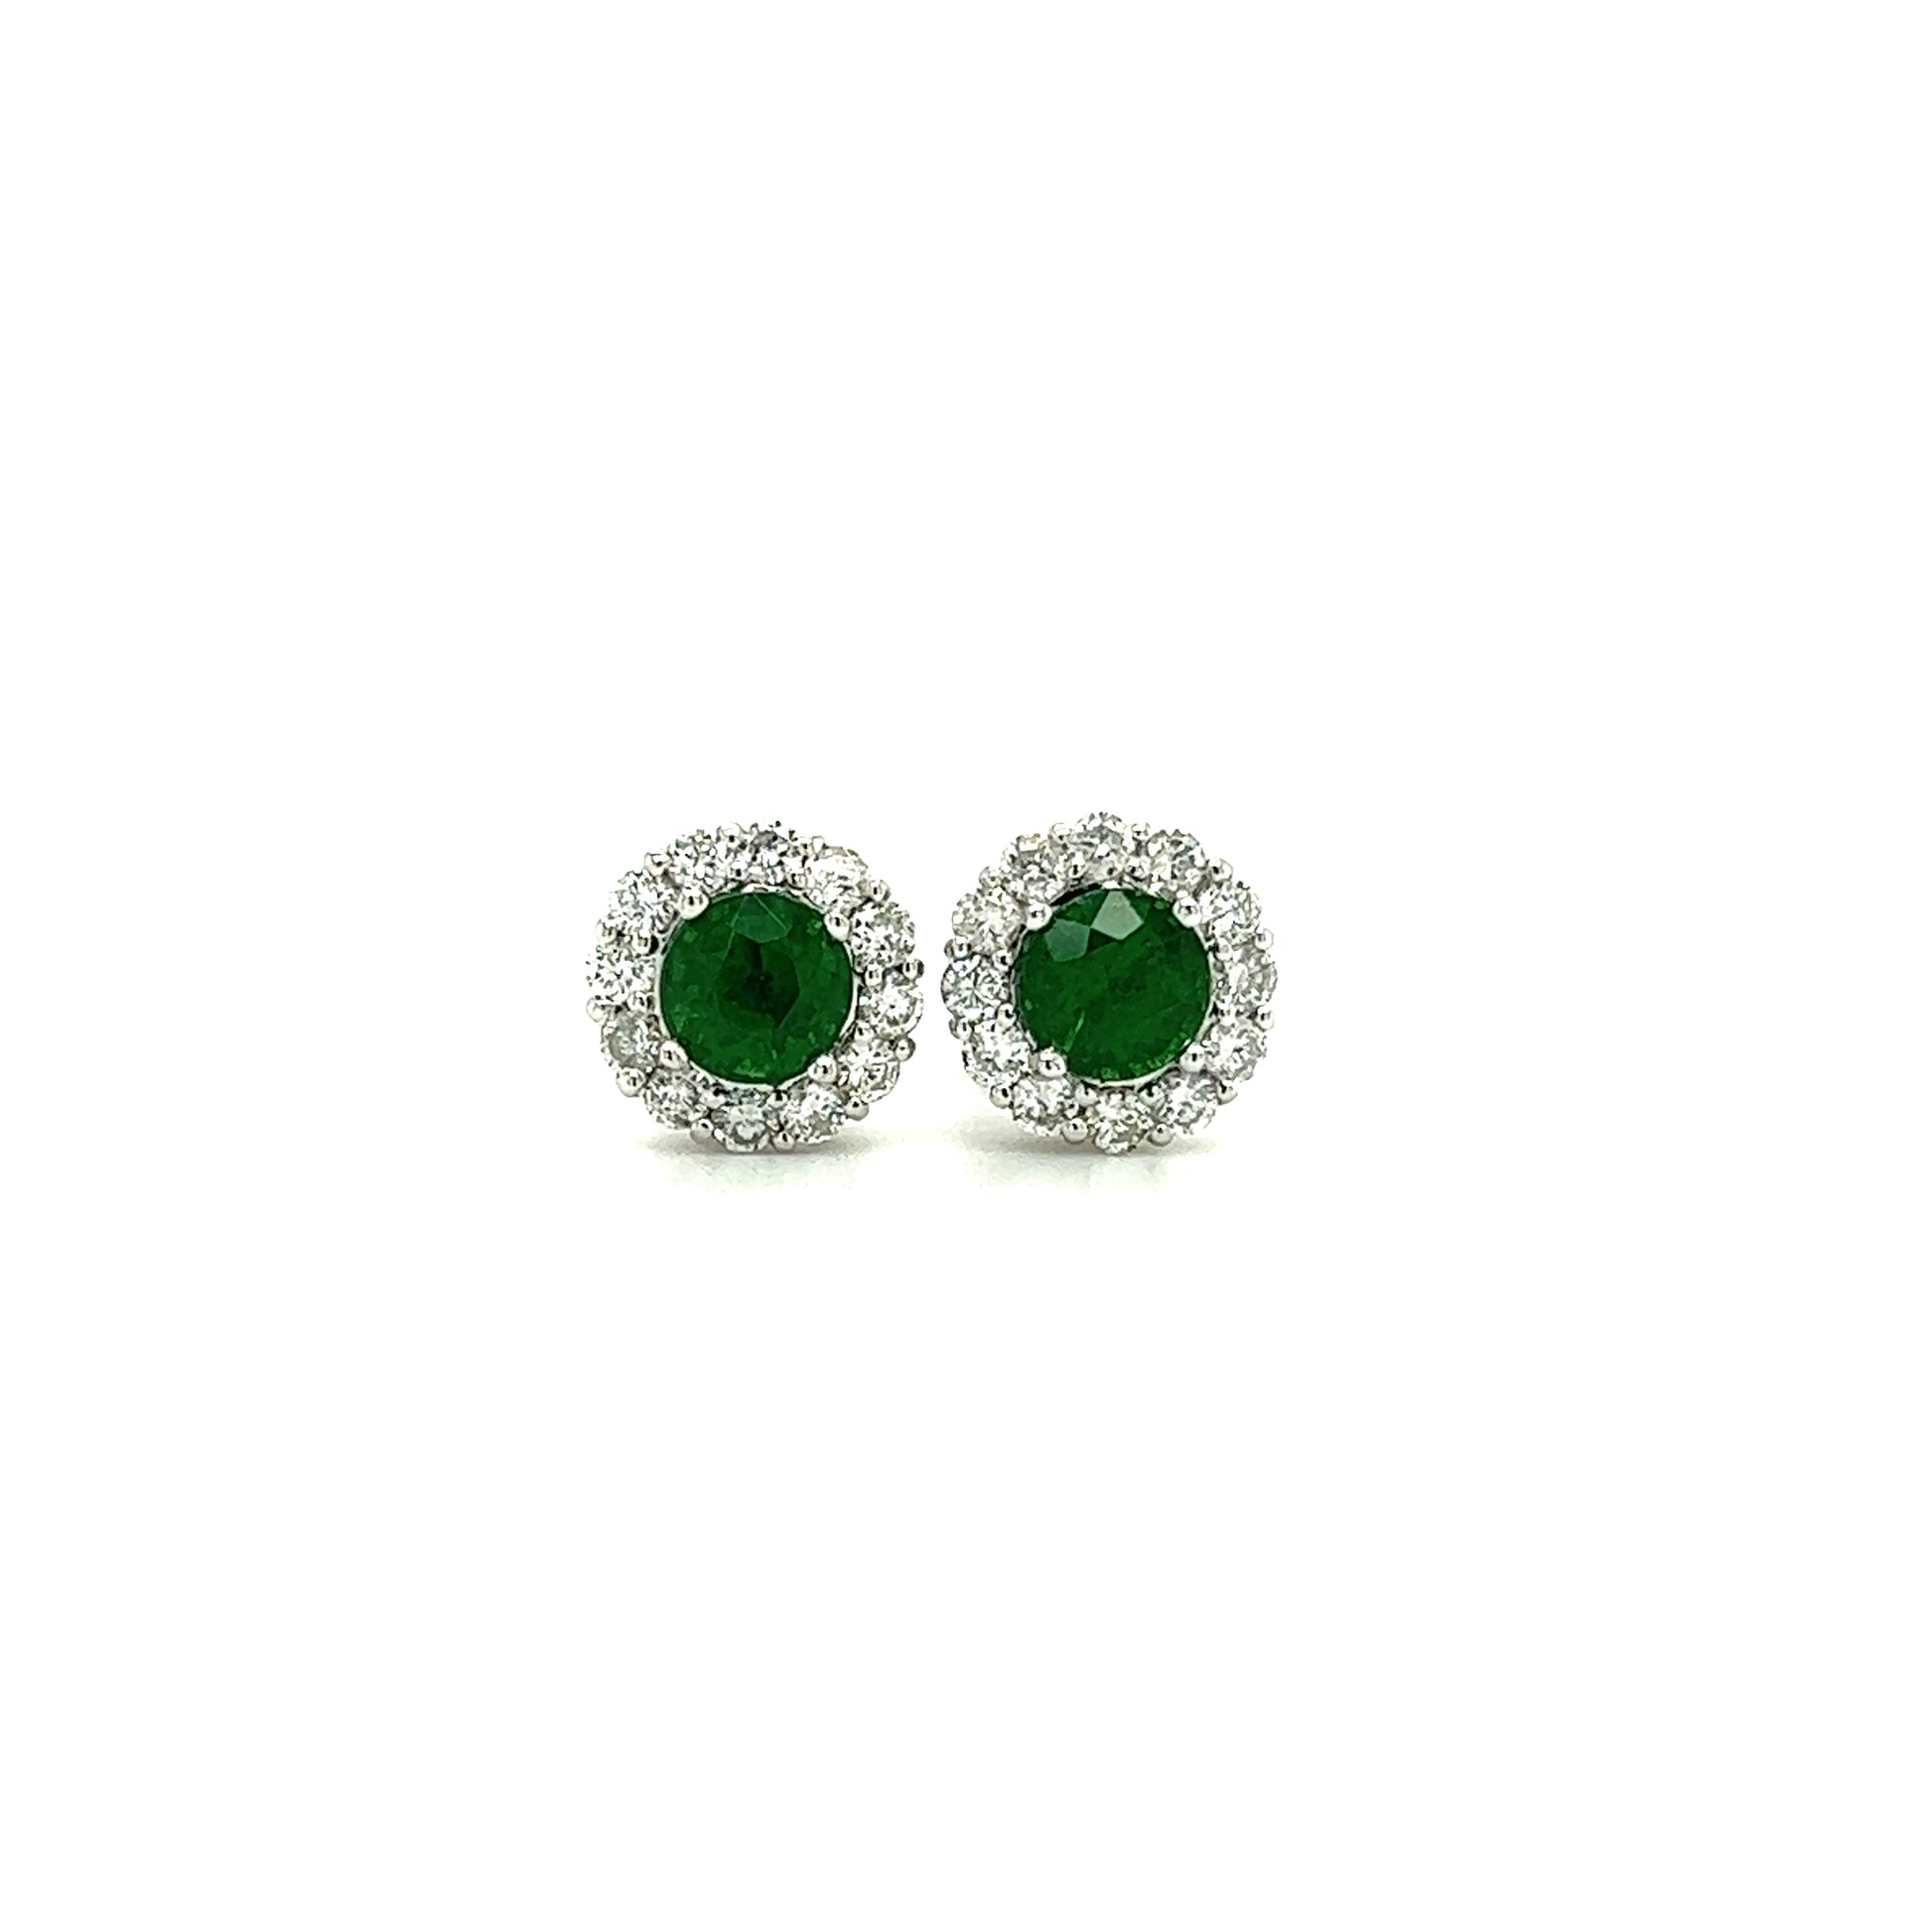 Round Tsavorite Stud Earrings with 0.56ctw of Diamonds in 14K White Gold Front View